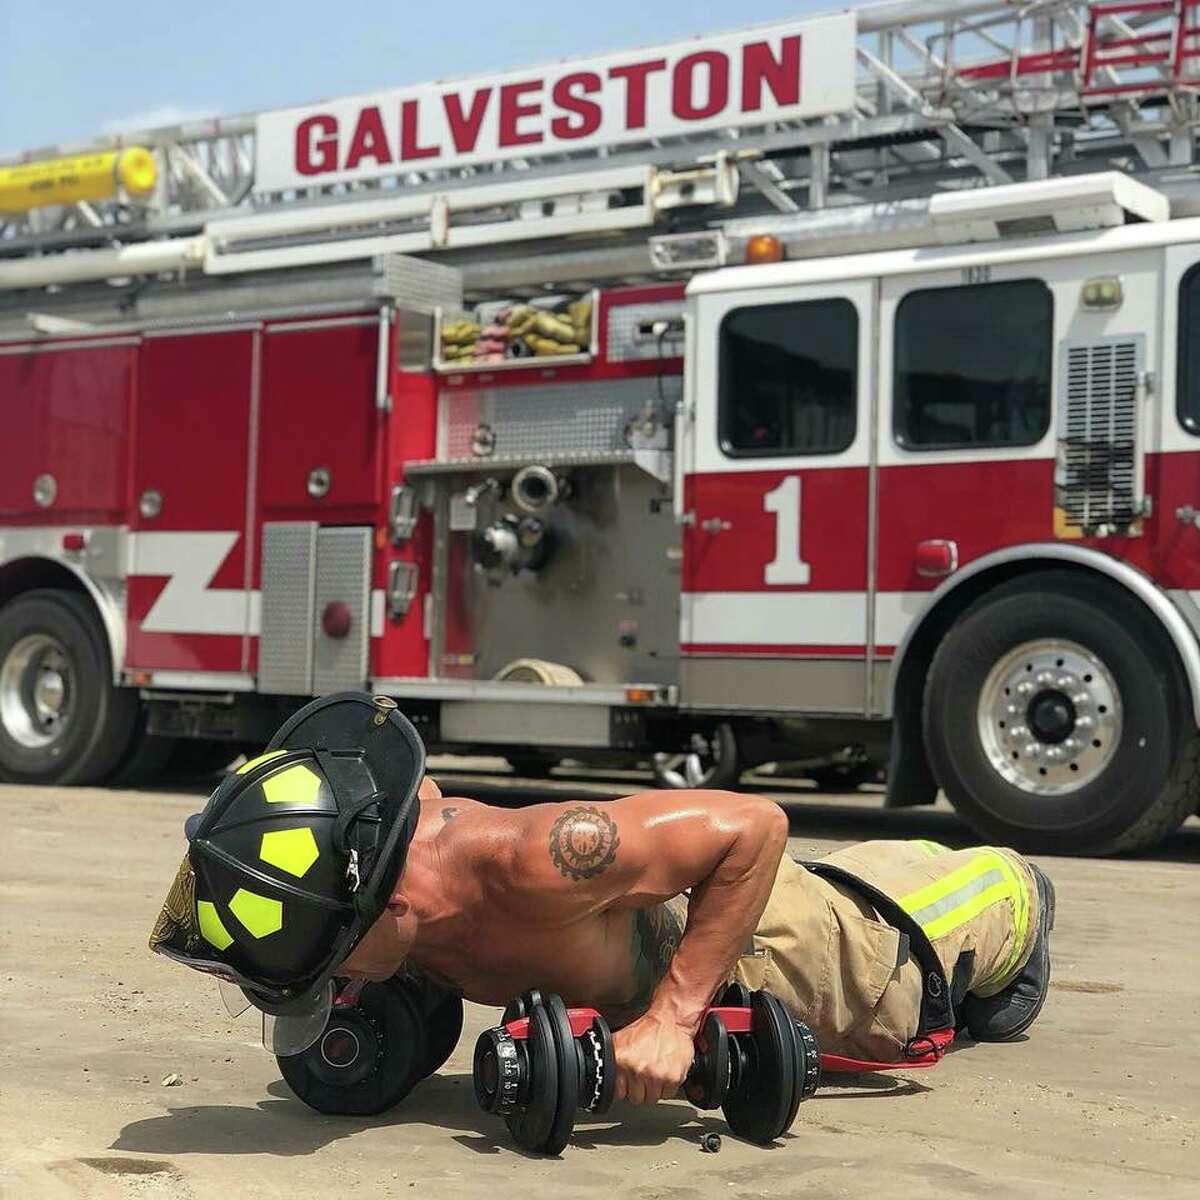 Steamy Galveston calendar is back, pairs shirtless fire fighters with